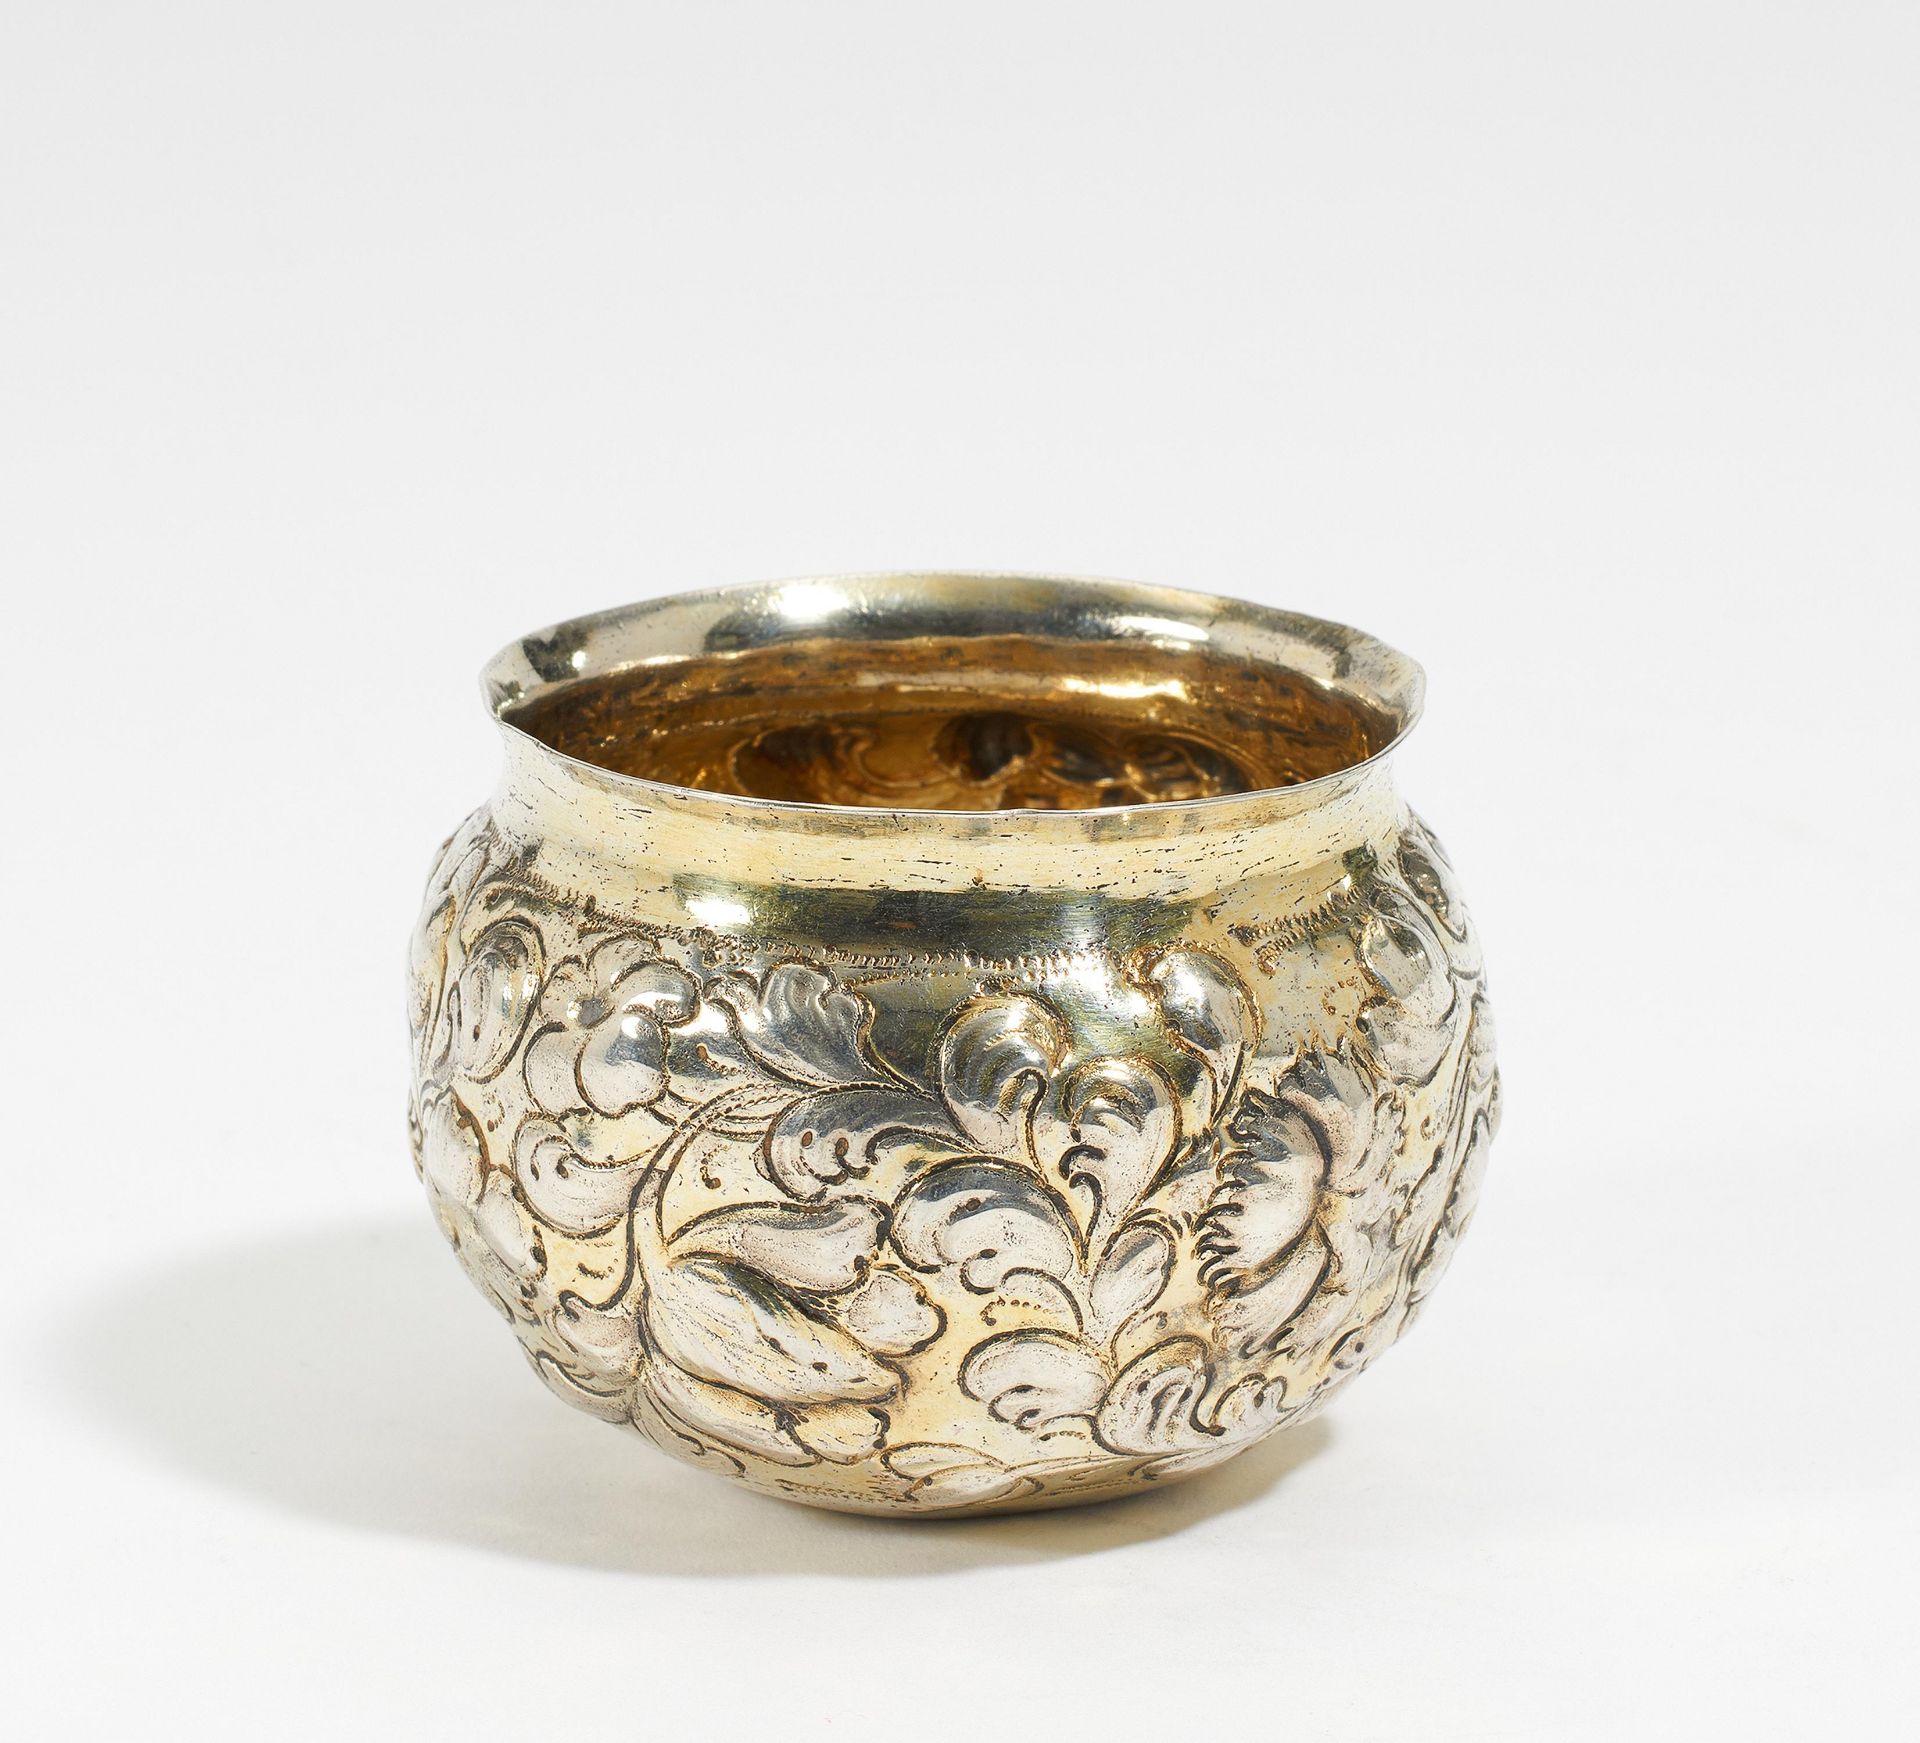 GILDED SILVER PALM CUP WITH FLOWER RELIEF. . 1650/1651-1657. Reinhold Rühl. Silver, gilded. Ca. 46g.